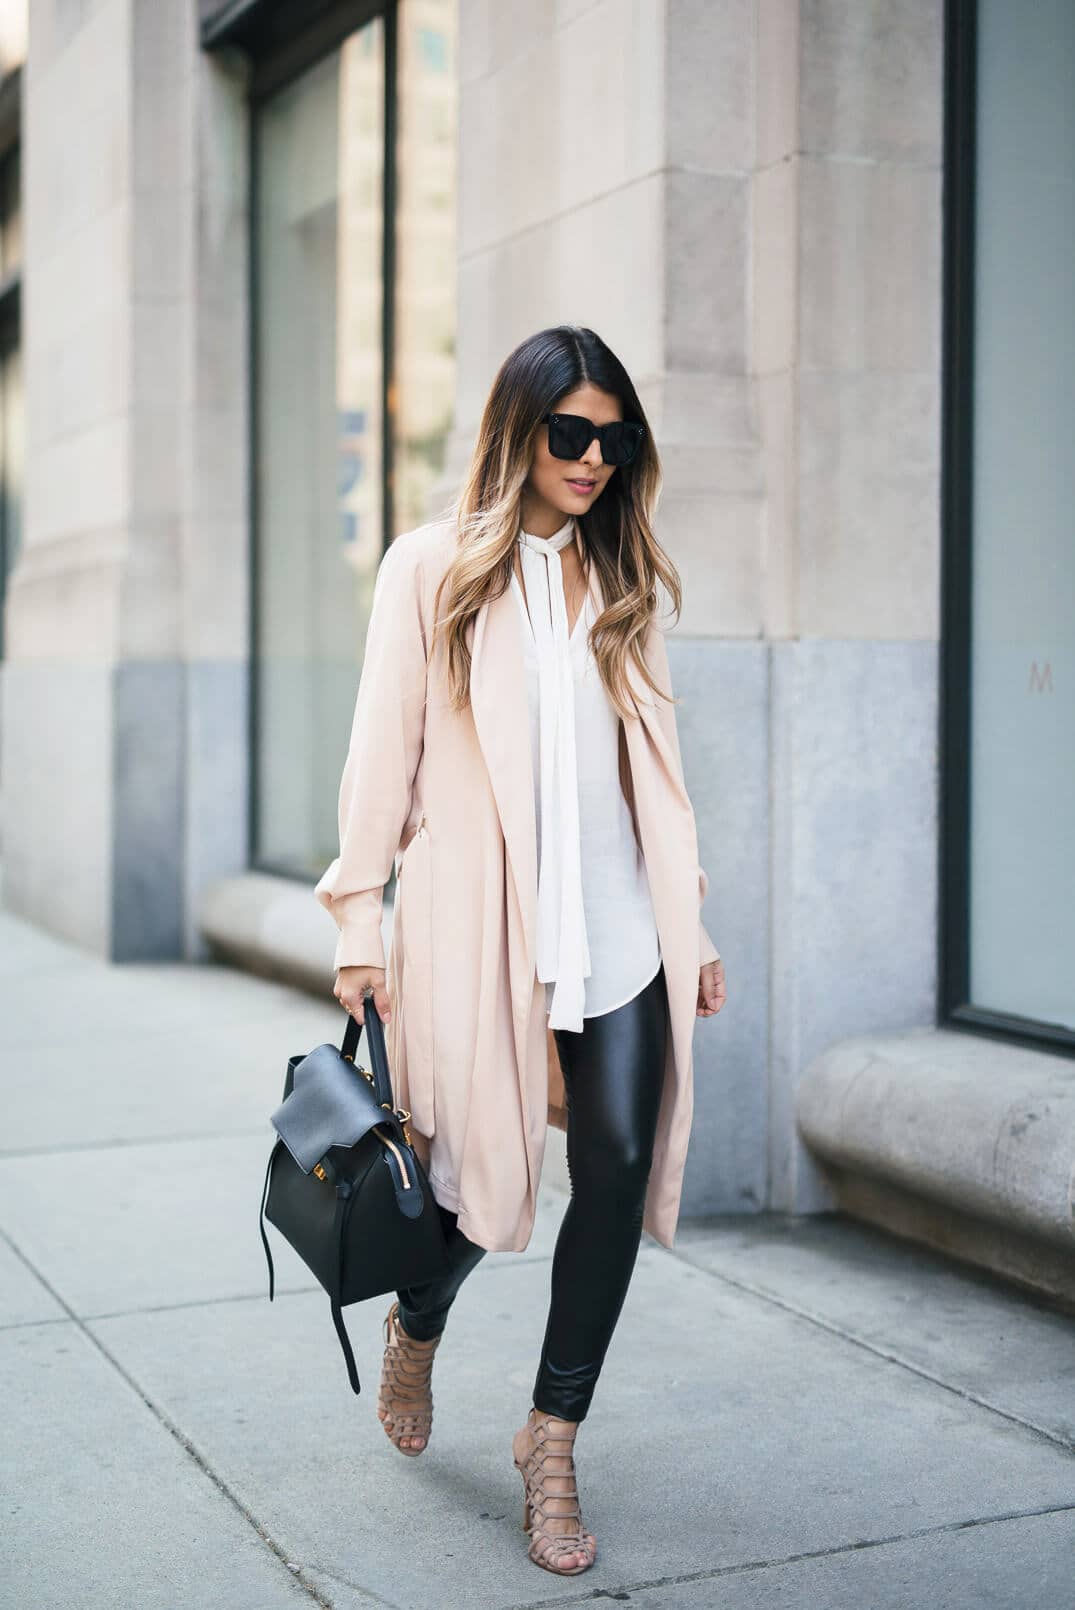 46 Spring Work Outfit Ideas That Will Brighten Your Day